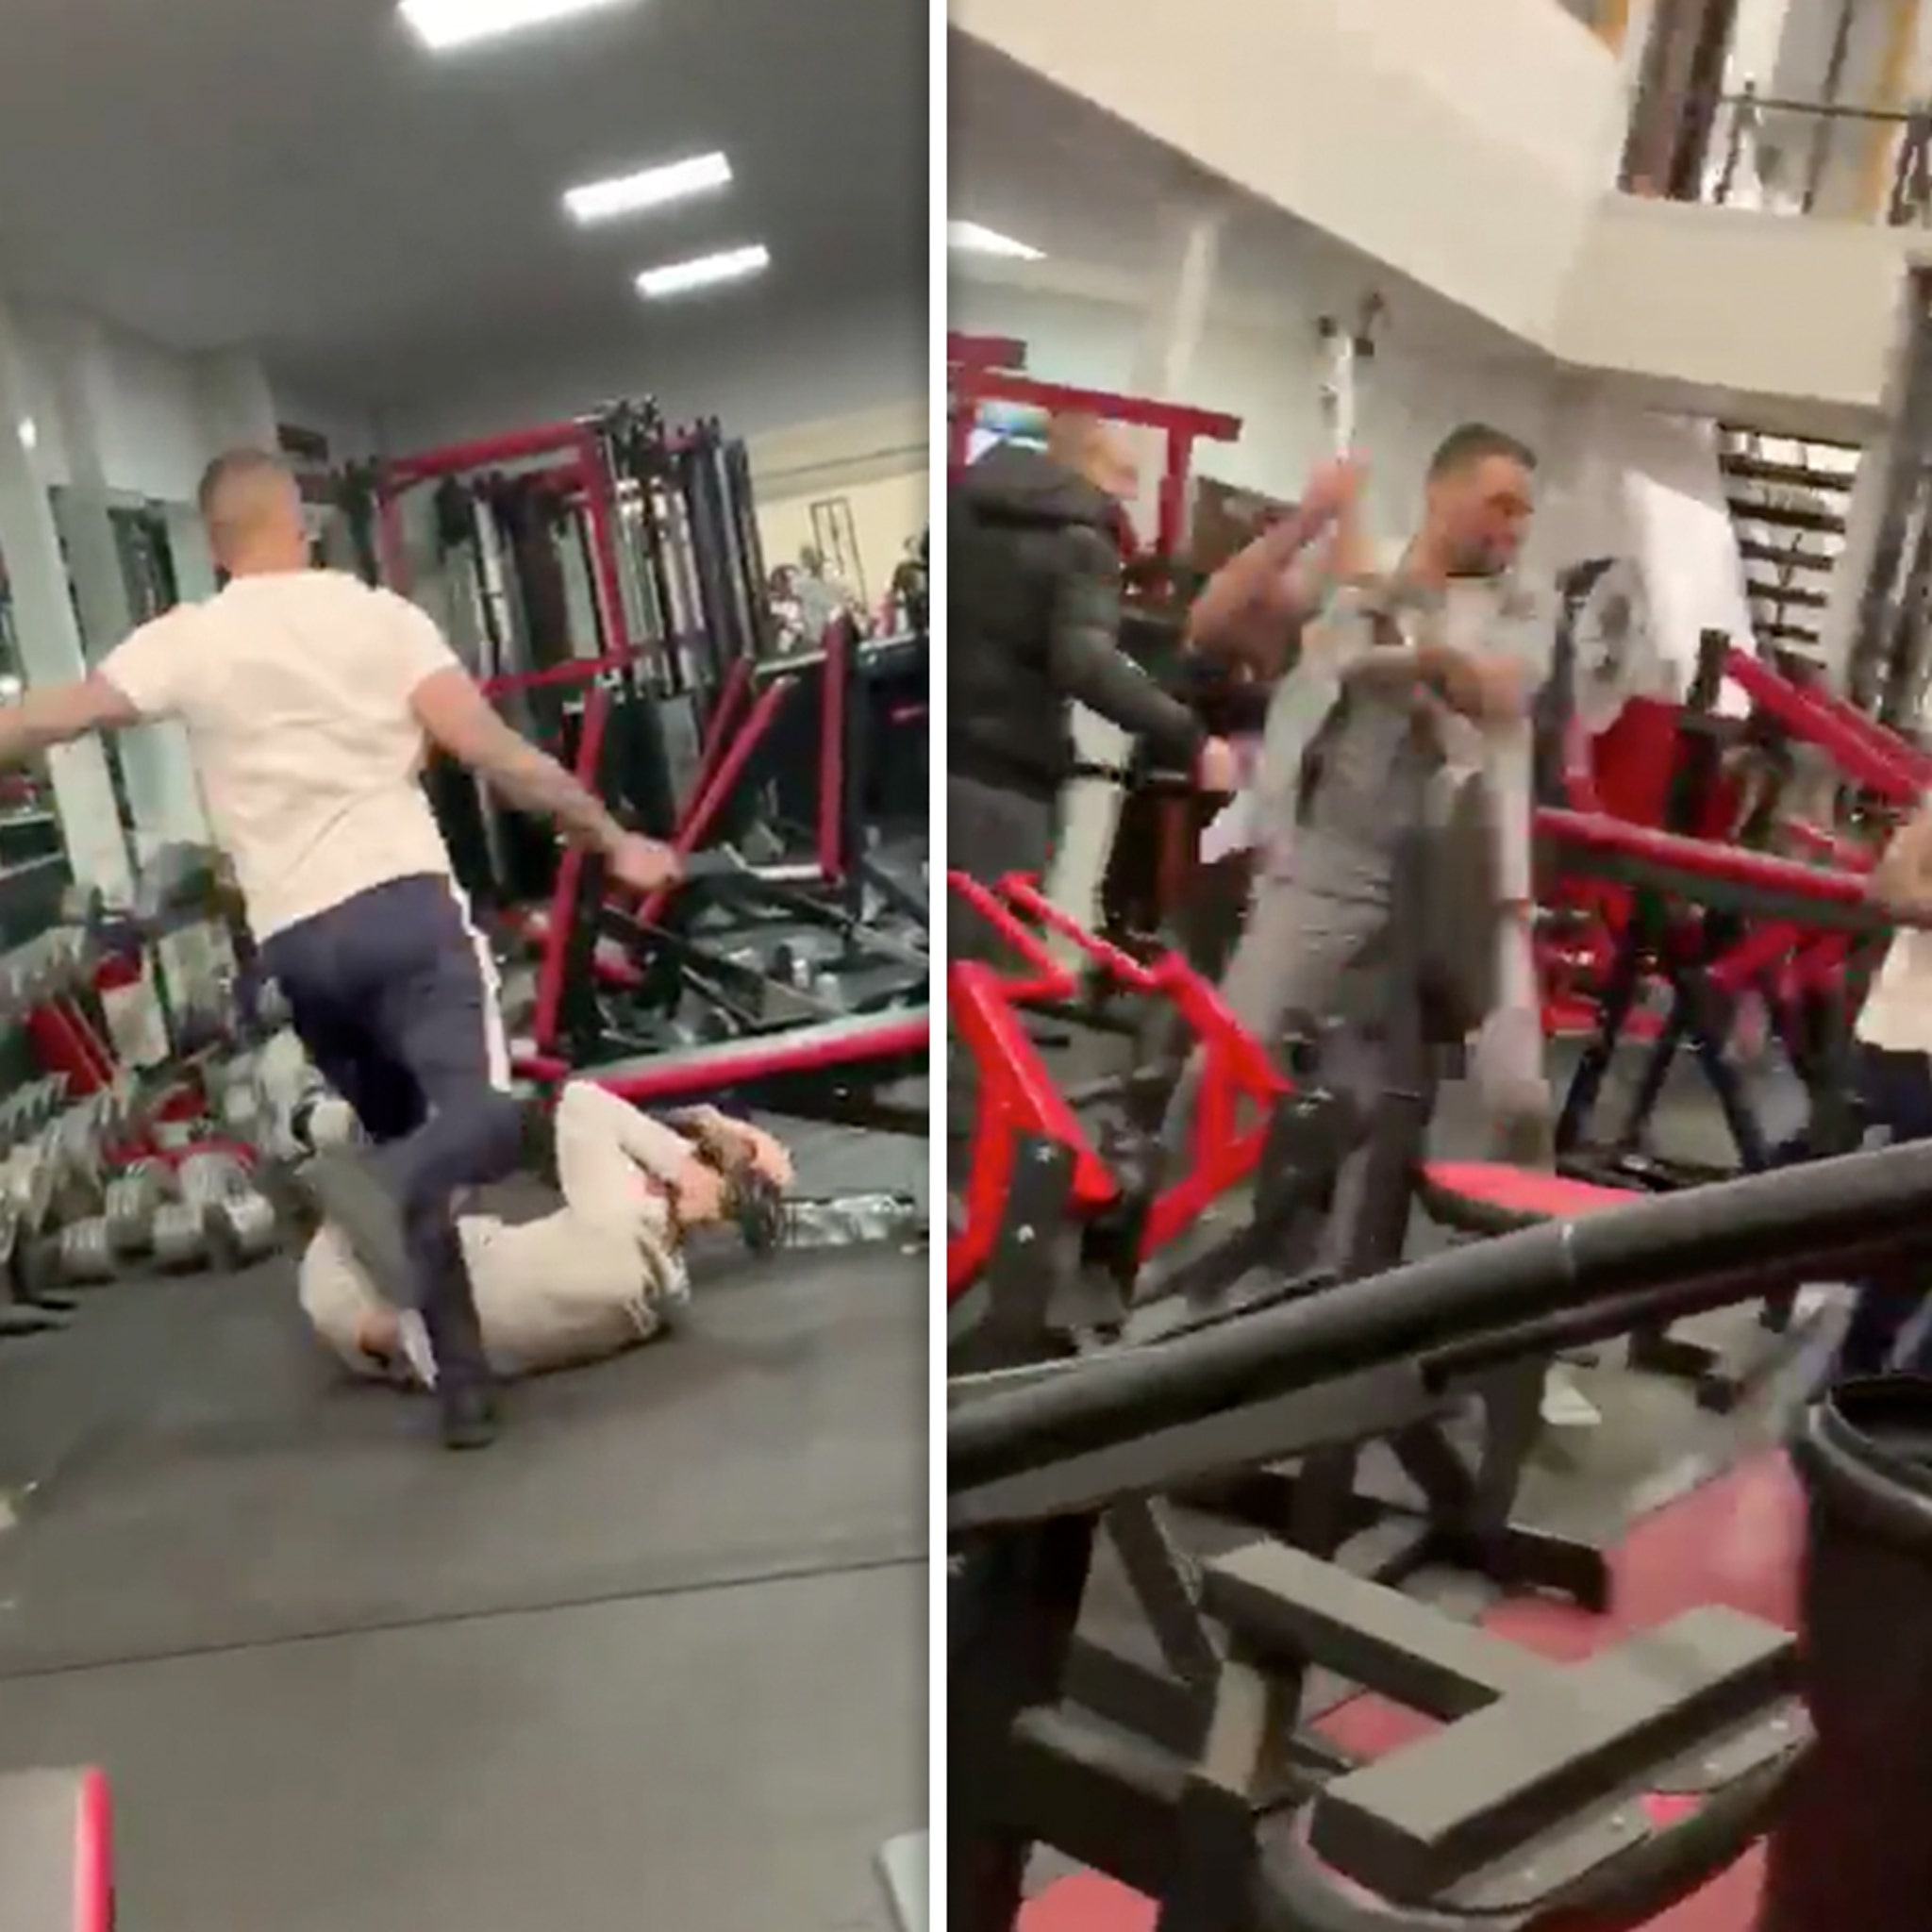 Gym Members Banned For Life After Insane Brawl, Police Investigating